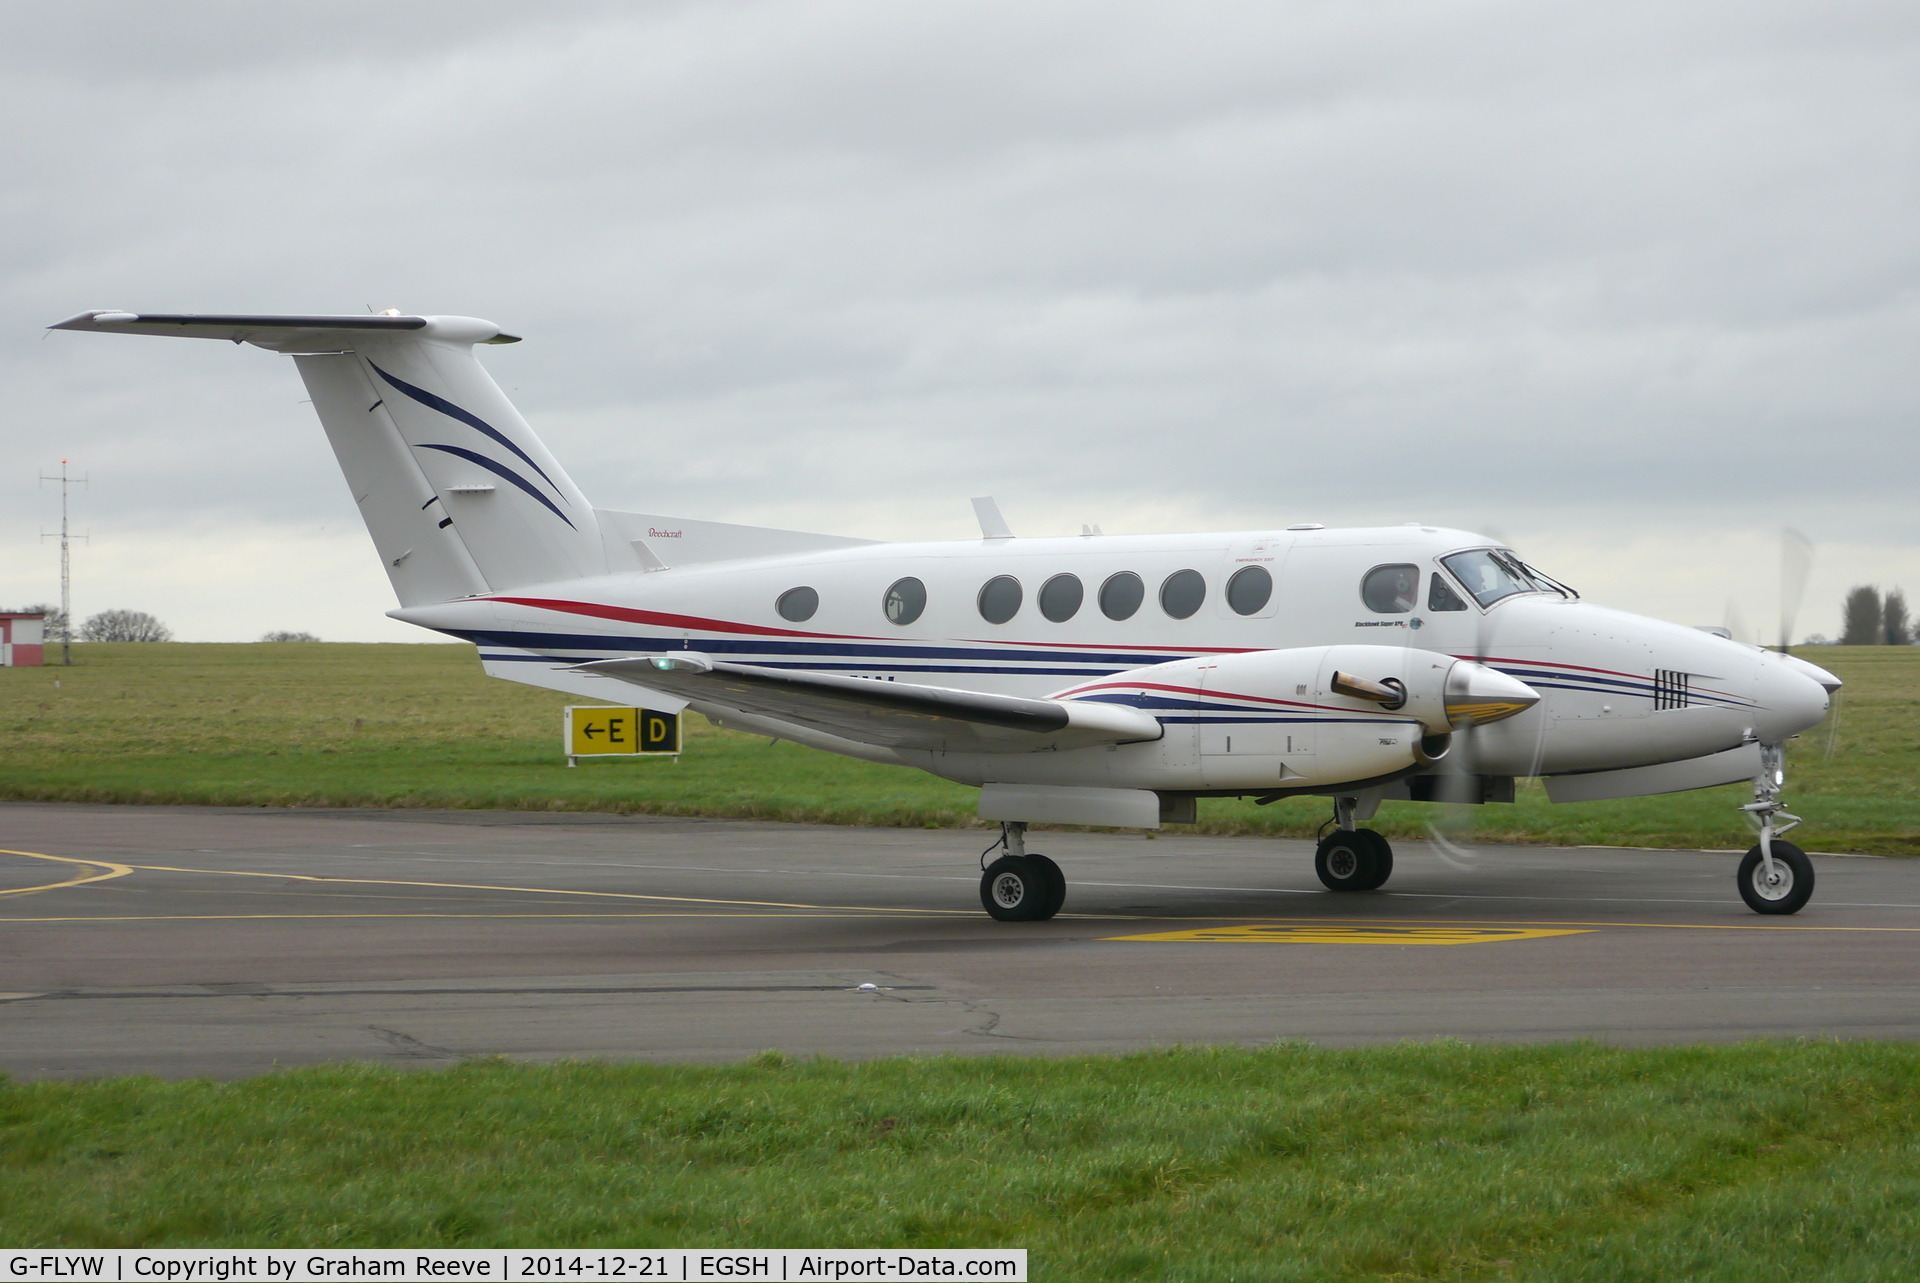 G-FLYW, 1977 Beech 200 Super King Air C/N BB-209, About to depart from Norwich.